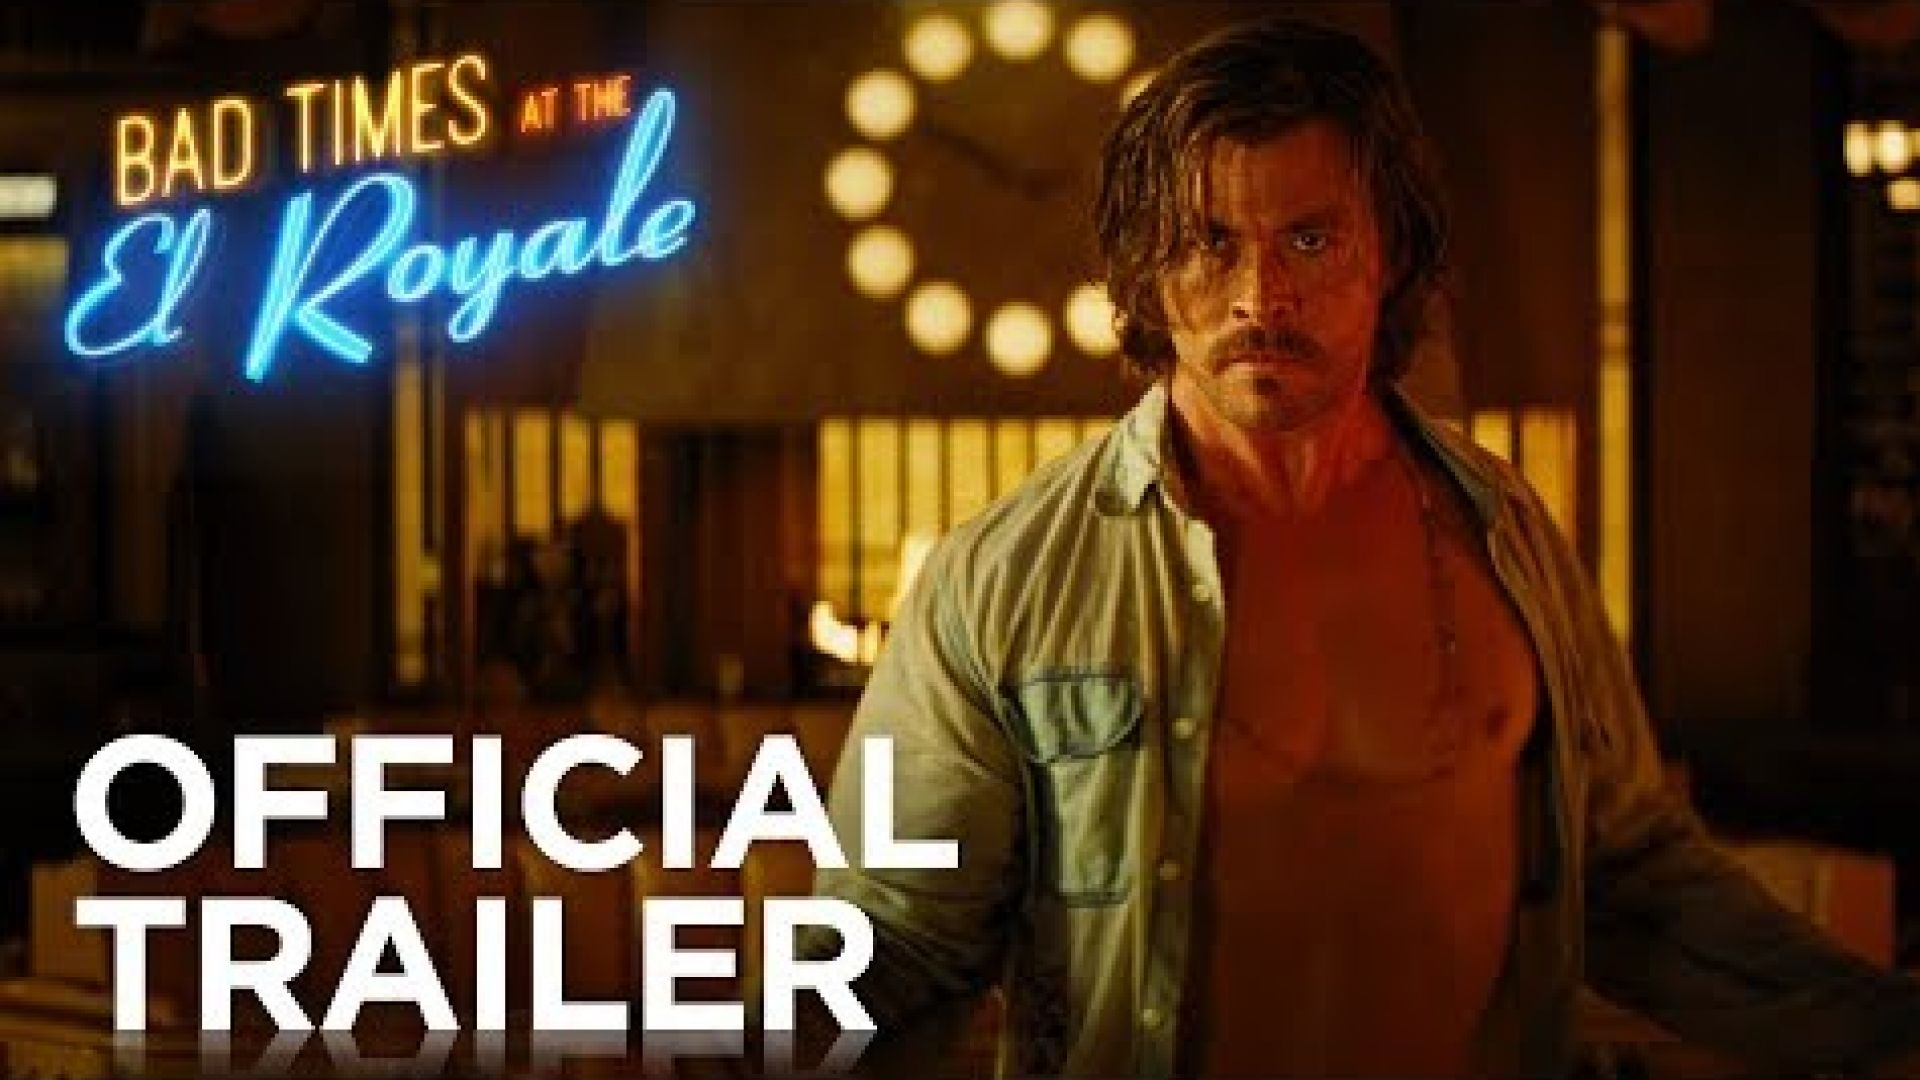 &#039;Bad Times At The El Royale&#039; Trailer - 20th Century Fox